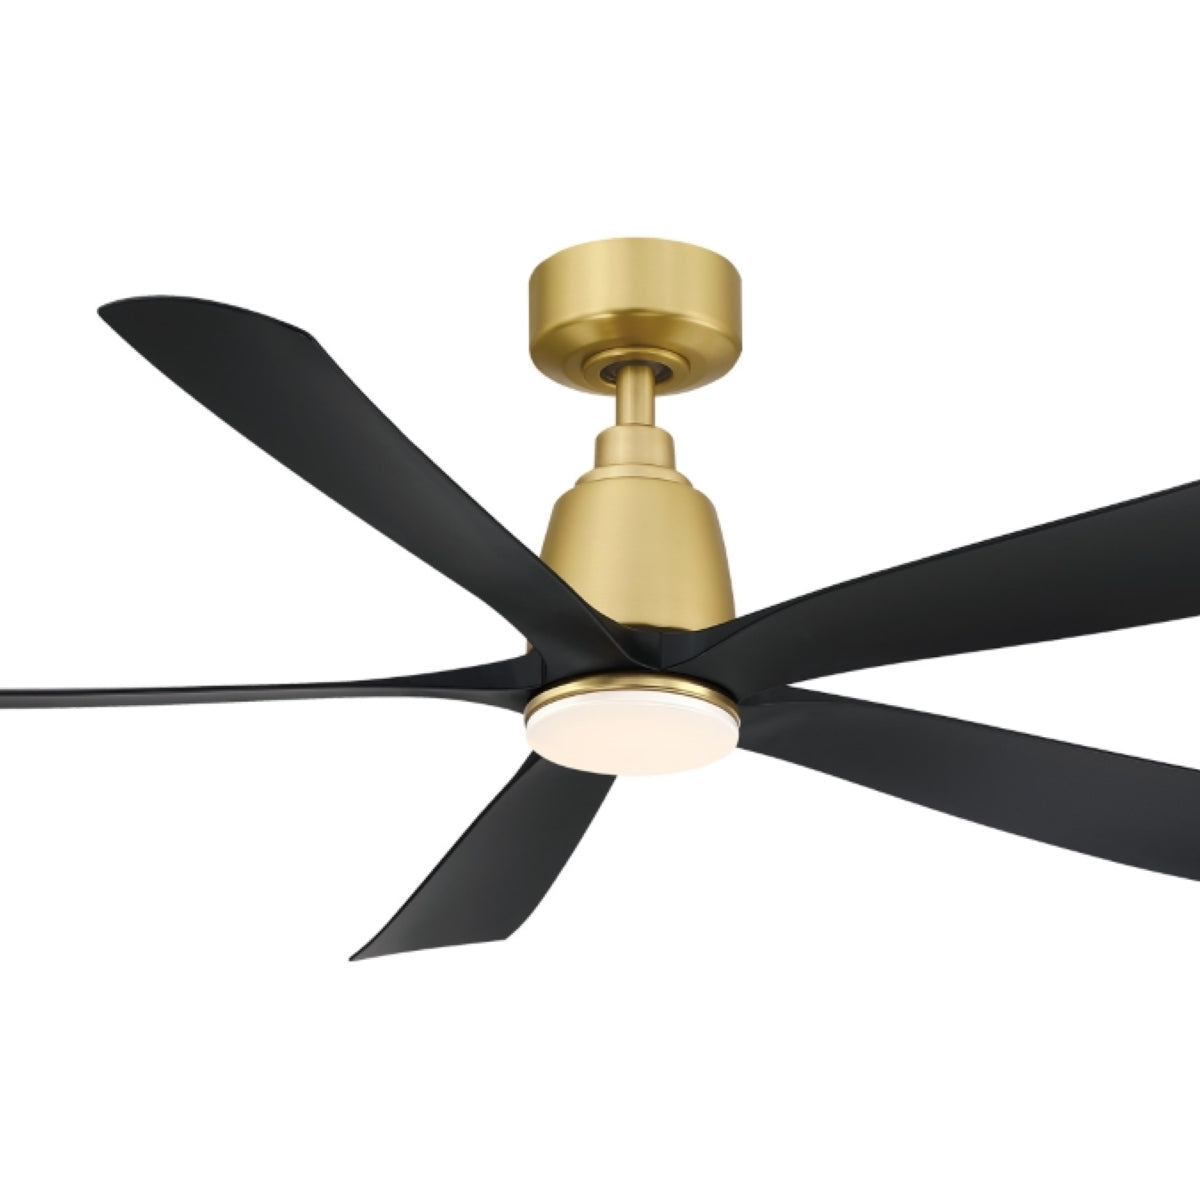 Kute5 52 Inch 5 Blades Indoor/Outdoor Ceiling Fan With Remote